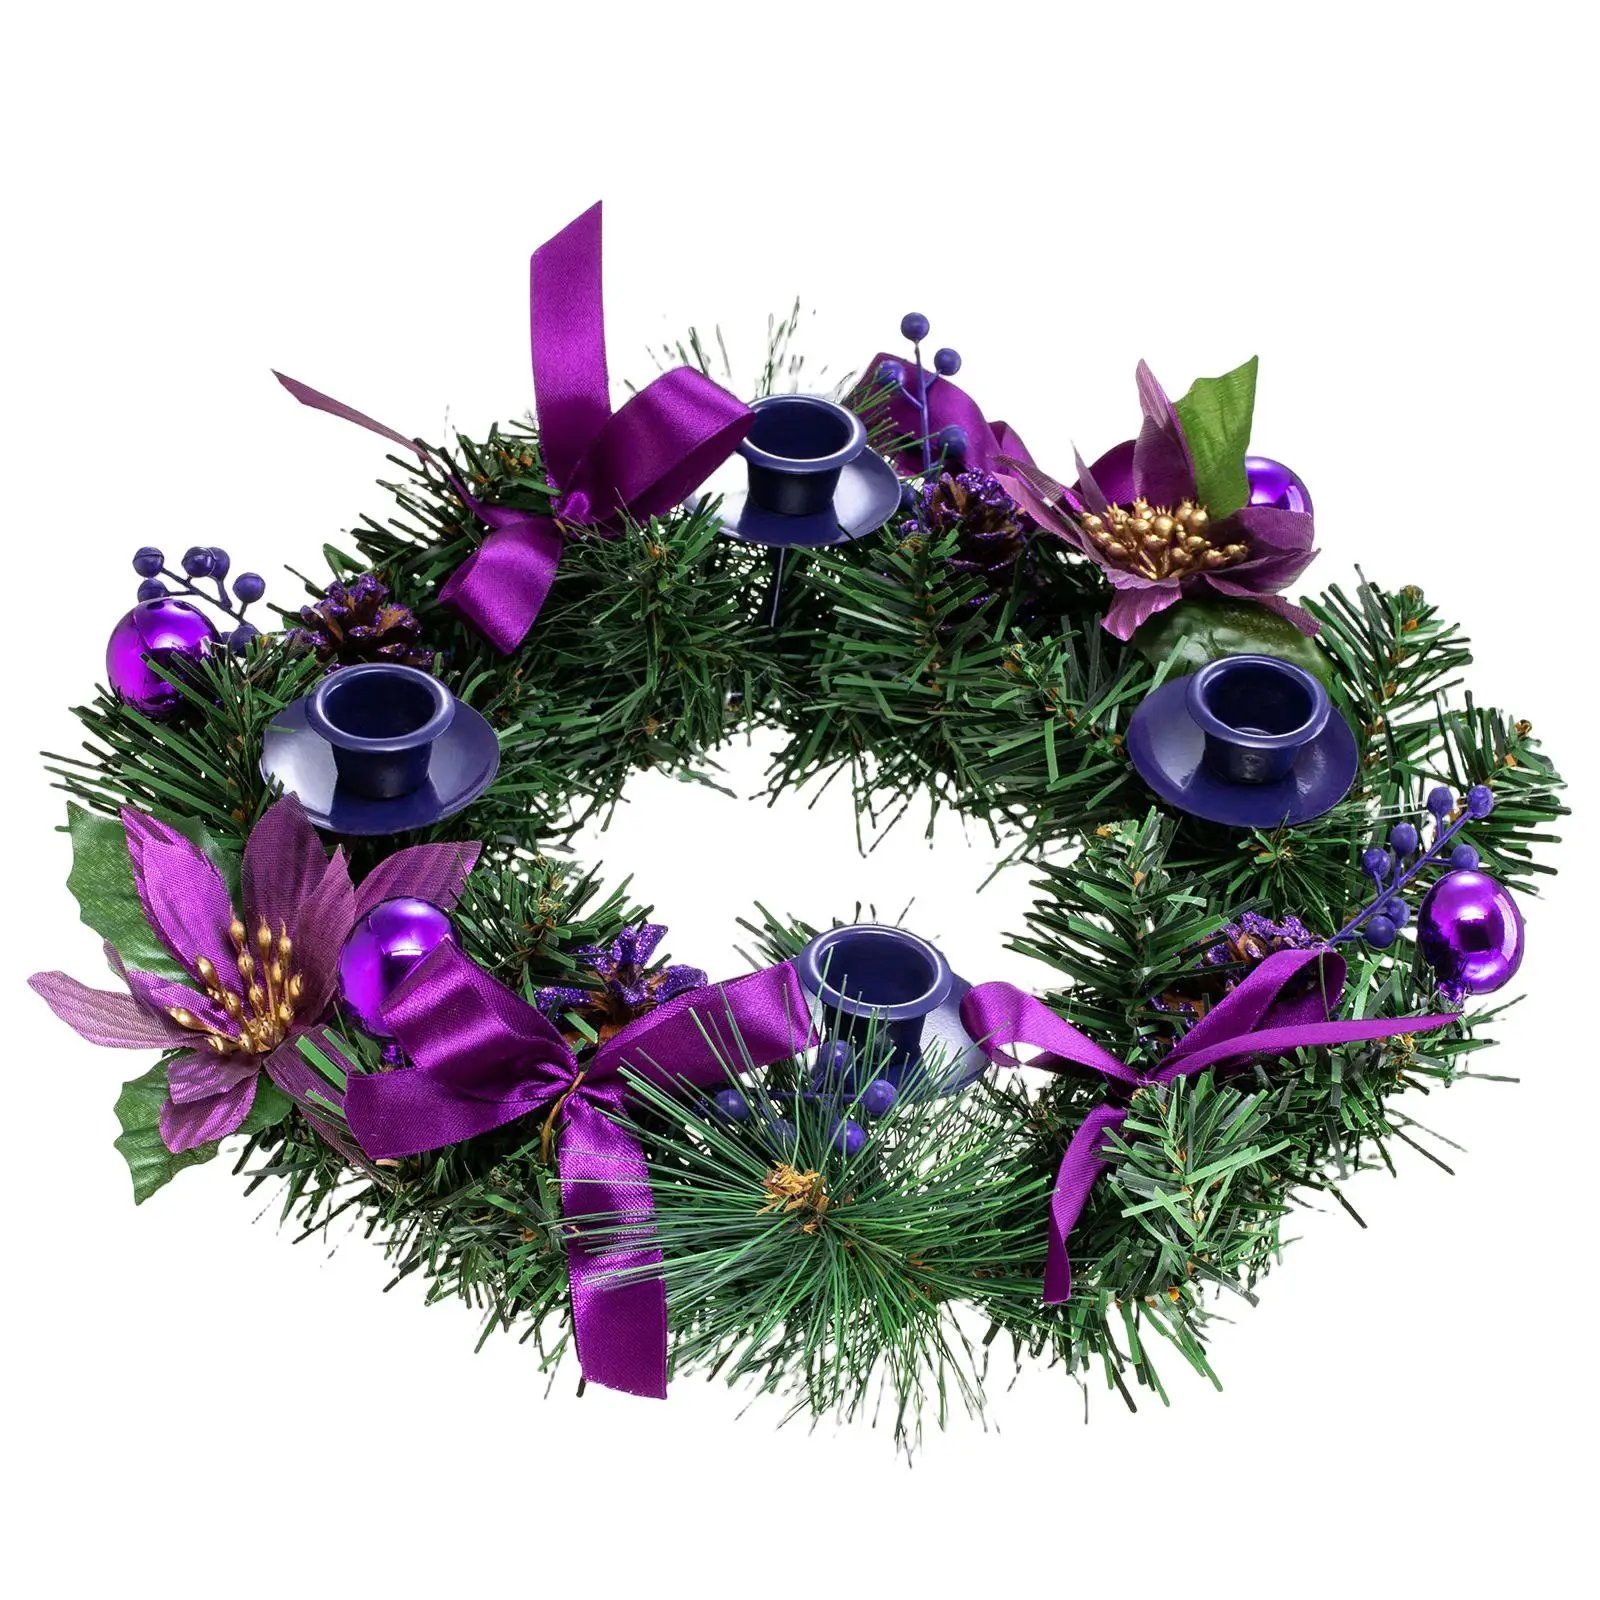 Creative Garland Ornaments Decoration Centerpiece Gift Event Dinner Holiday